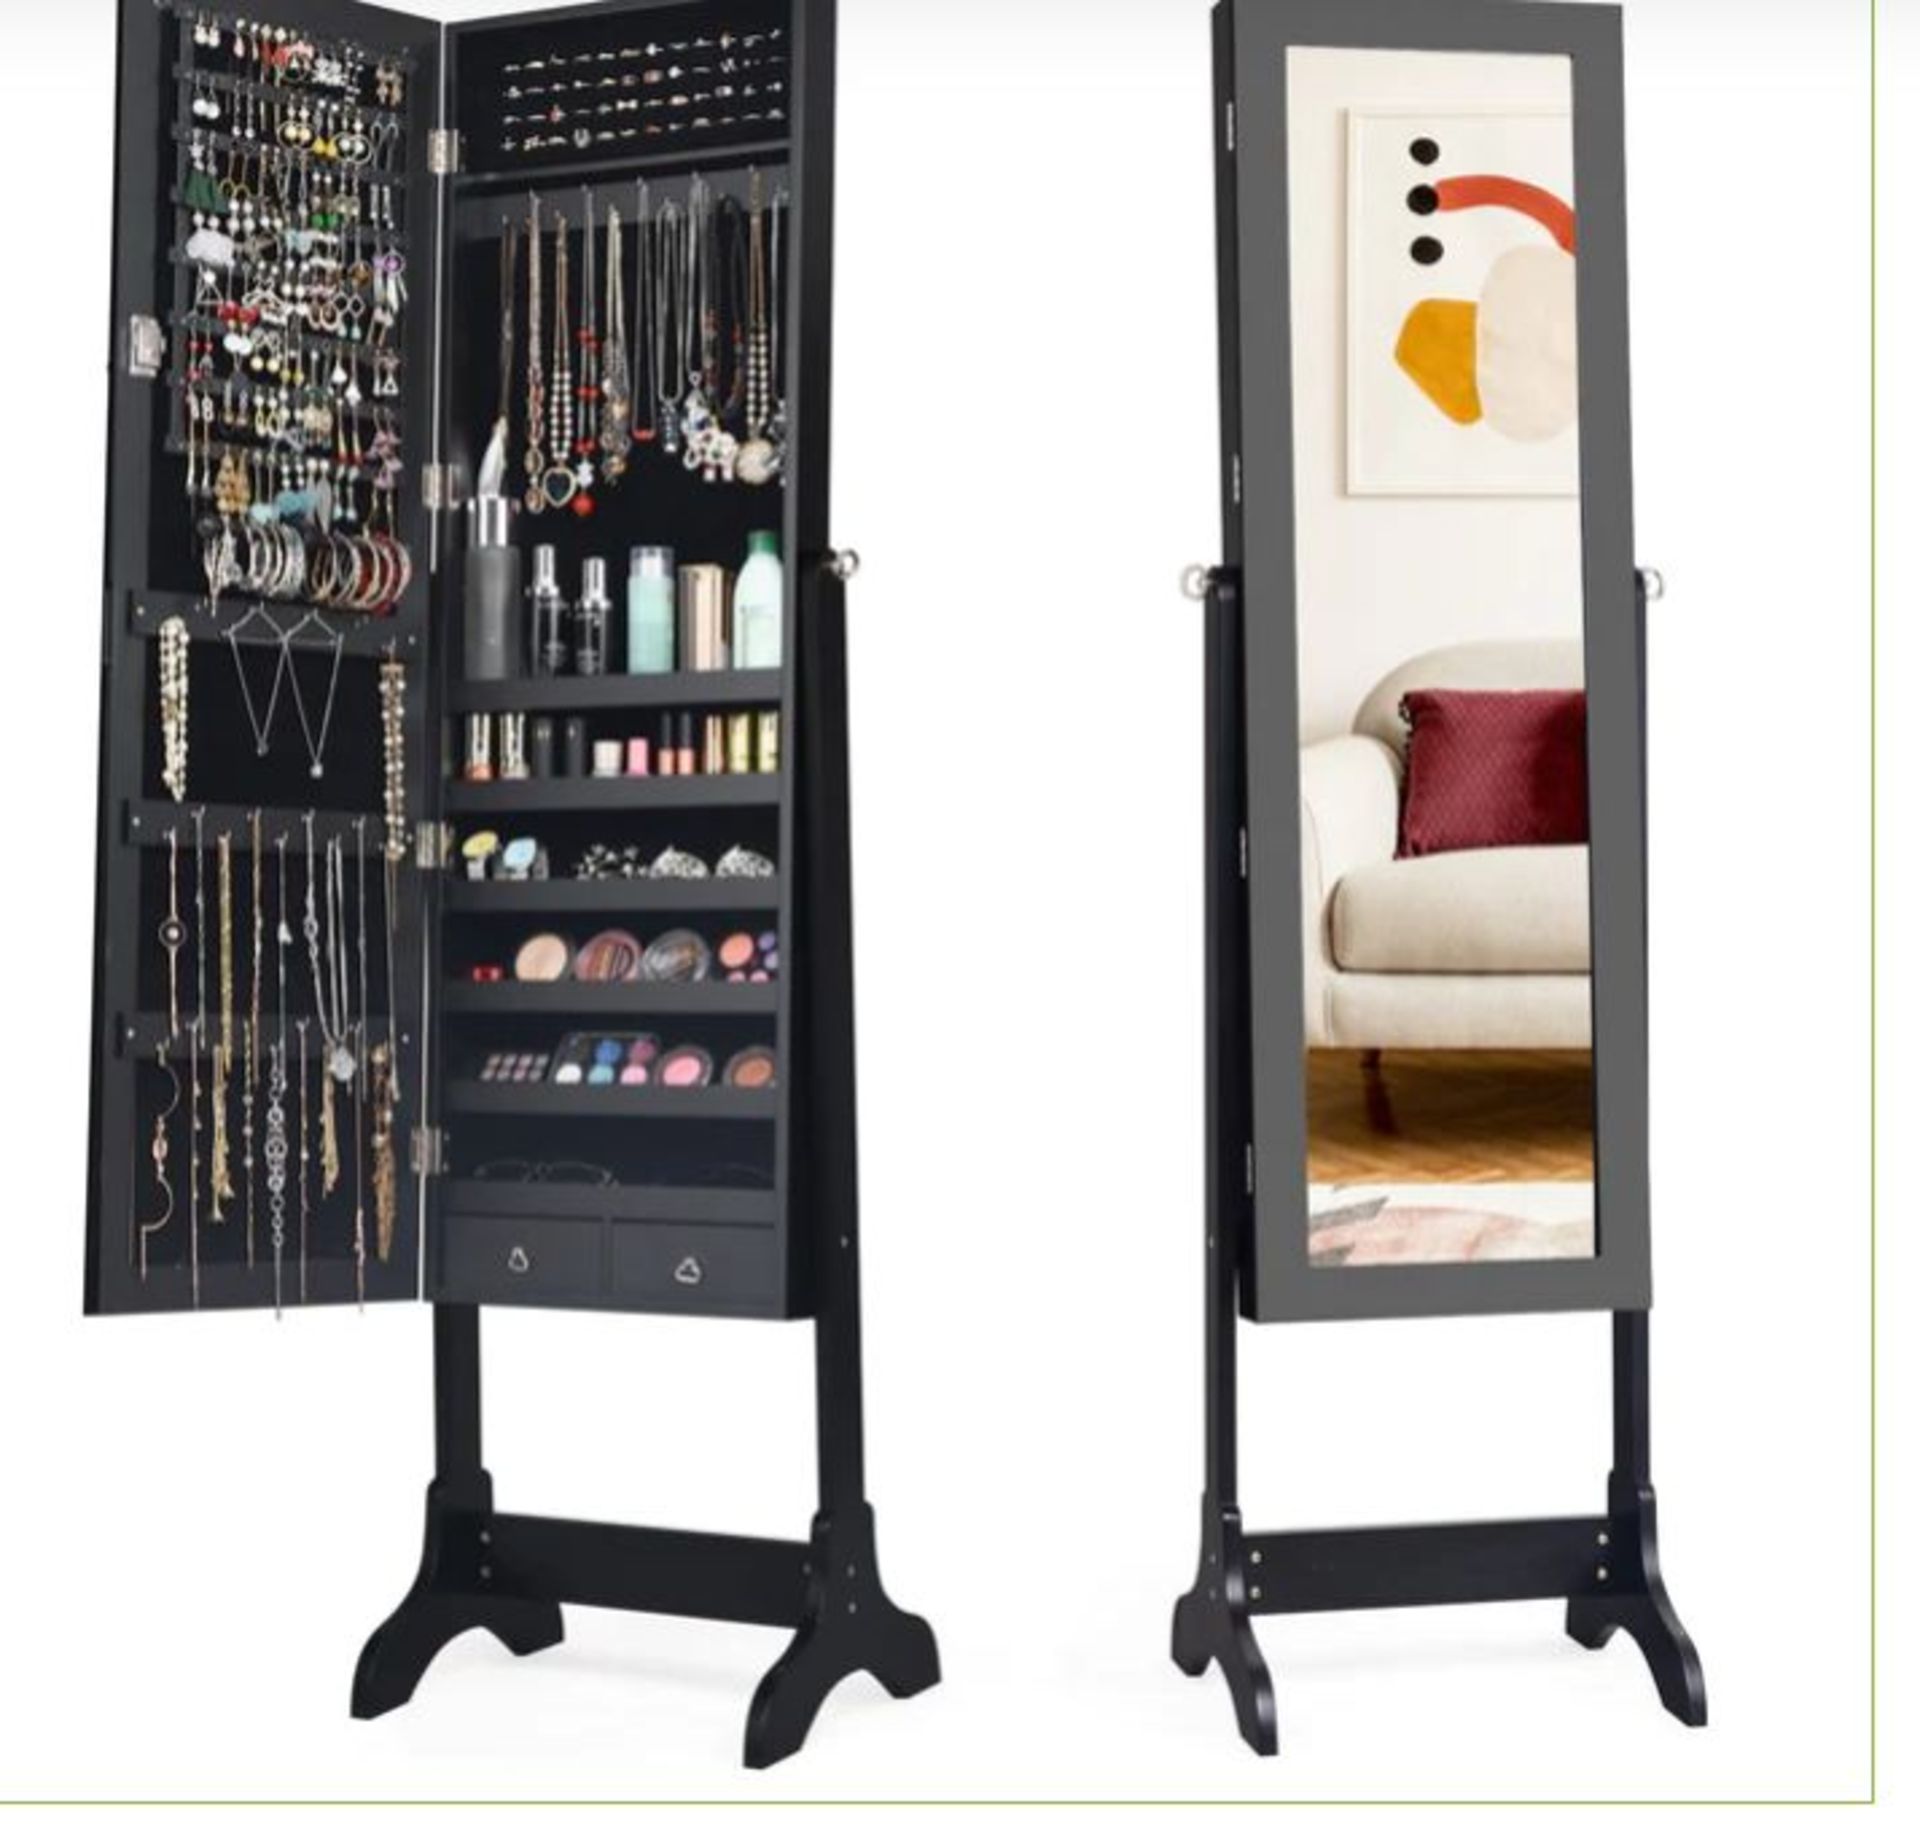 FREESTANDING JEWELRY CABINET WITH FULL-LENGTH MIRROR AND DRAWERS-BLACK. -ER53.